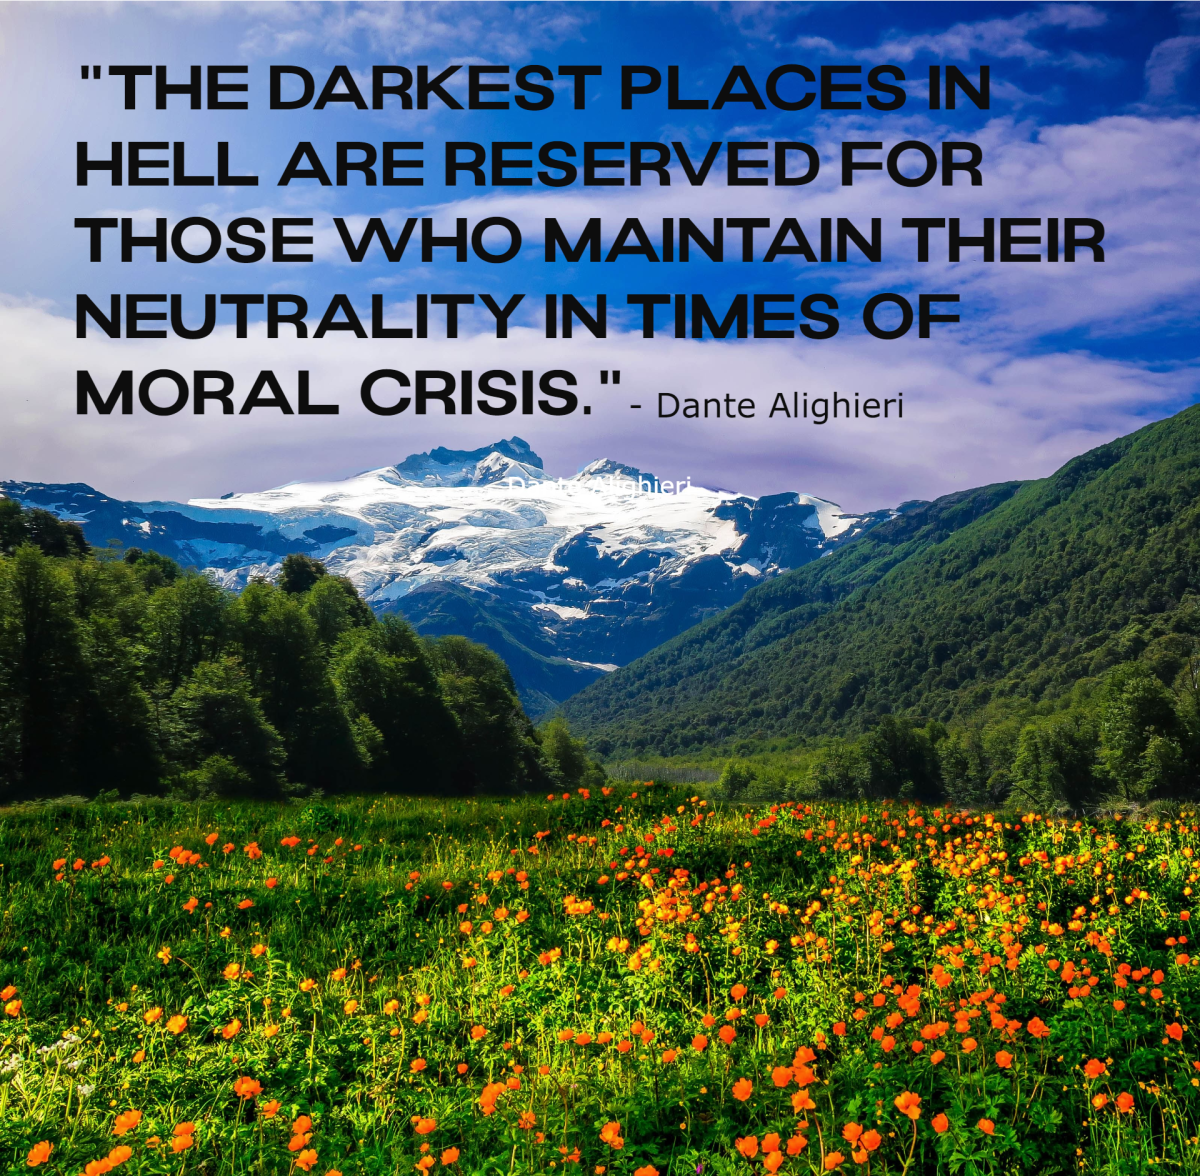 "The darkest places in hell are reserved for those who maintain their neutrality in times of moral crisis." - Dante Alighieri, Italian poet, writer & philosopher